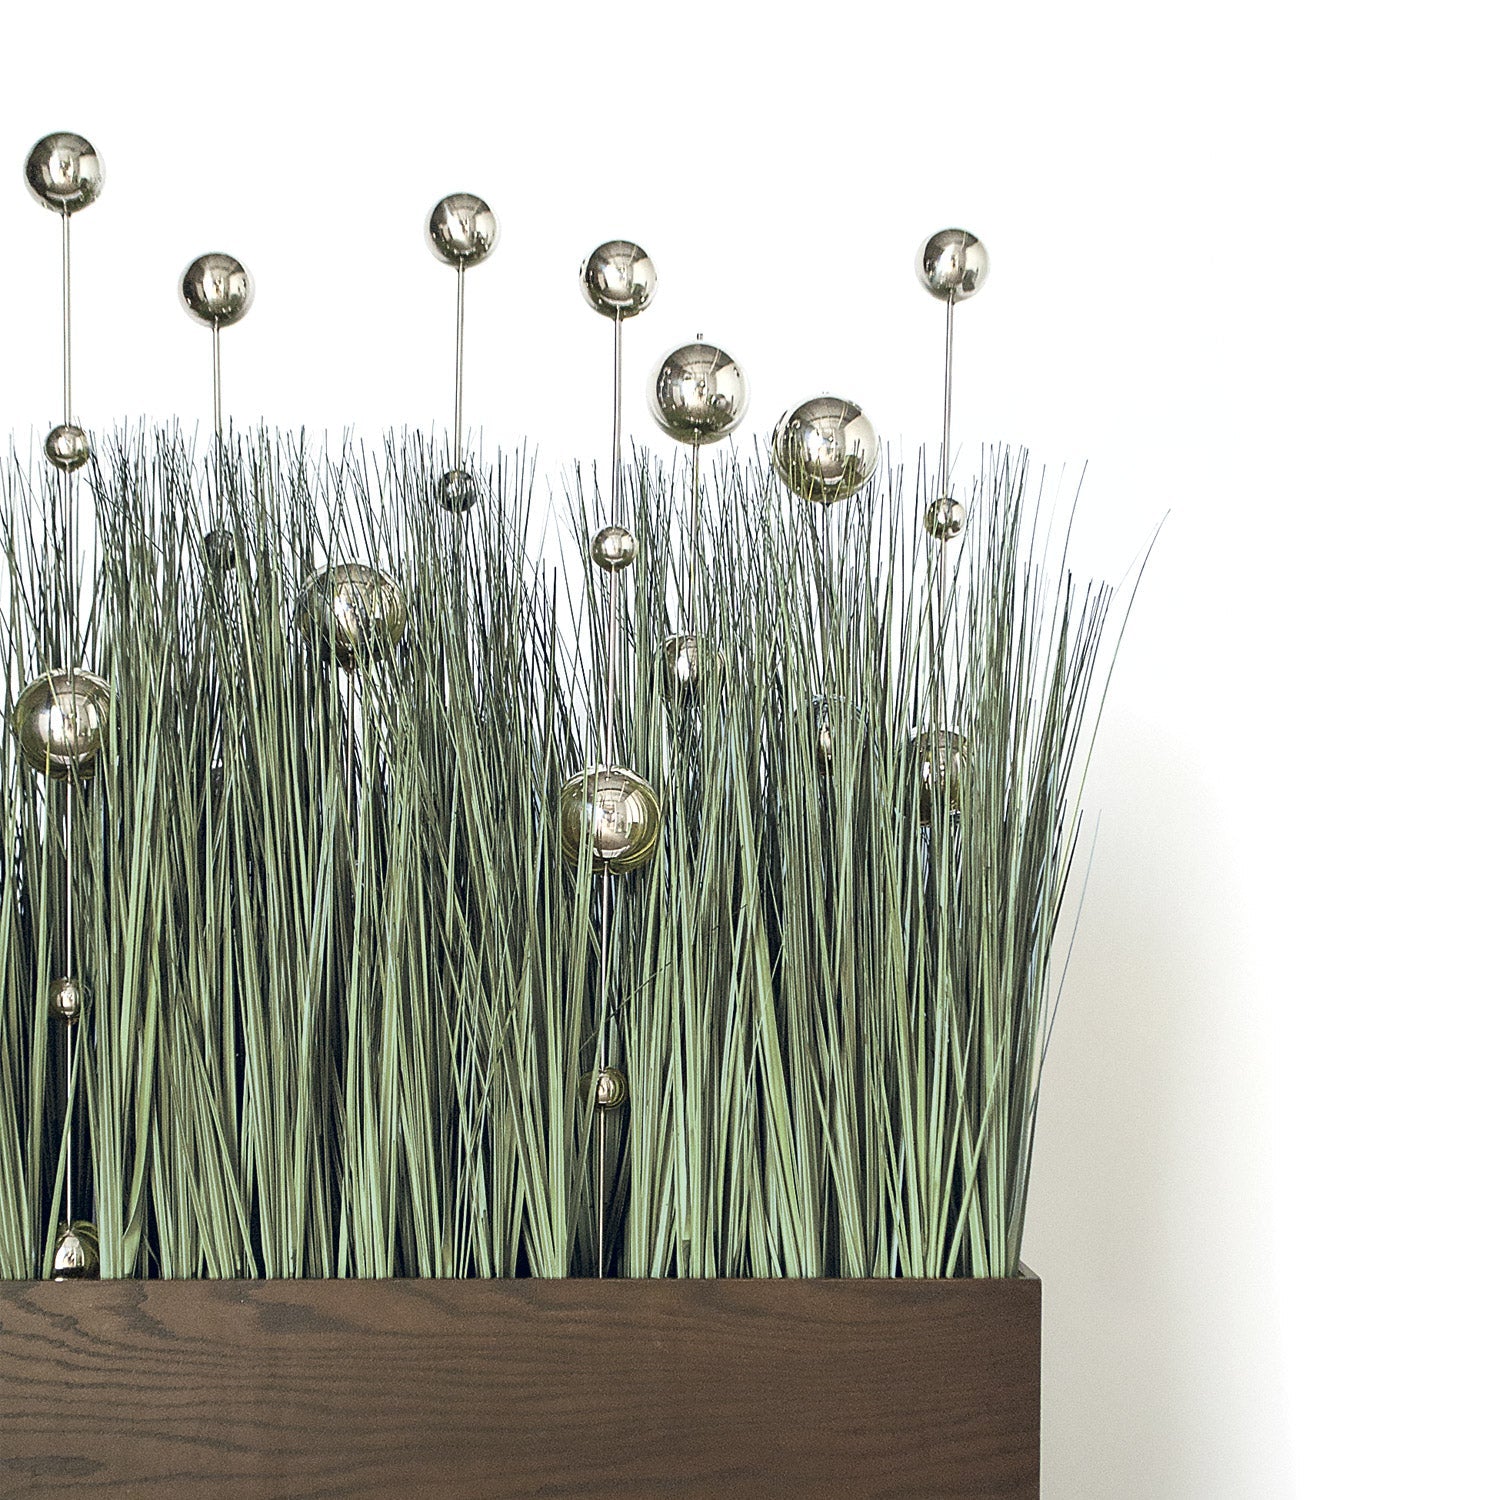 Grass: Cortada Grass with Stainless Ball Sway